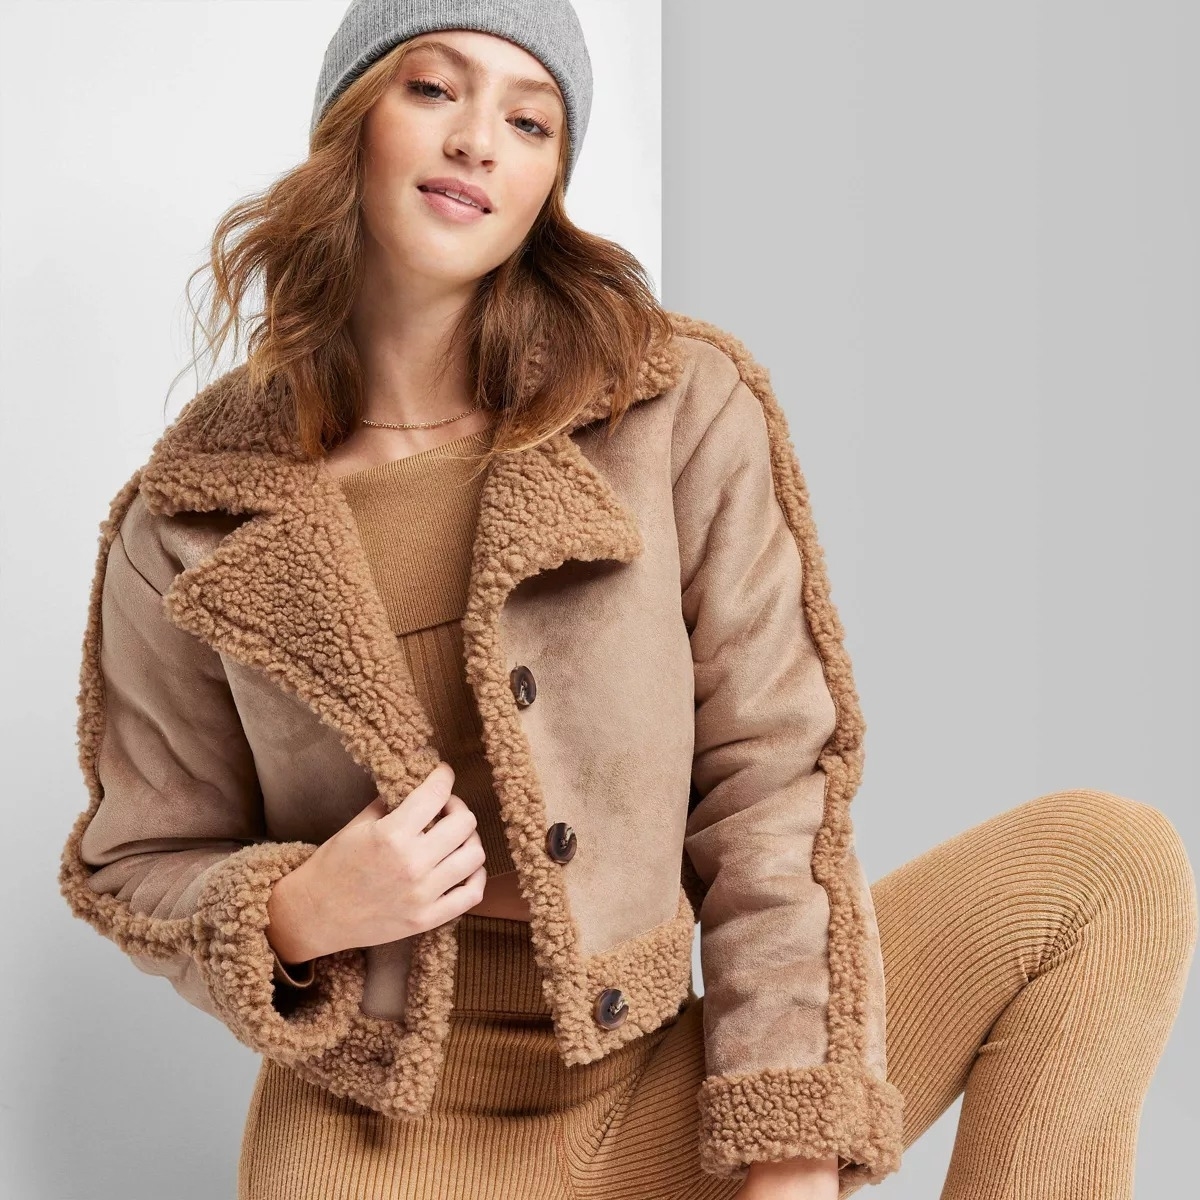 shearling jacket in color brown on model